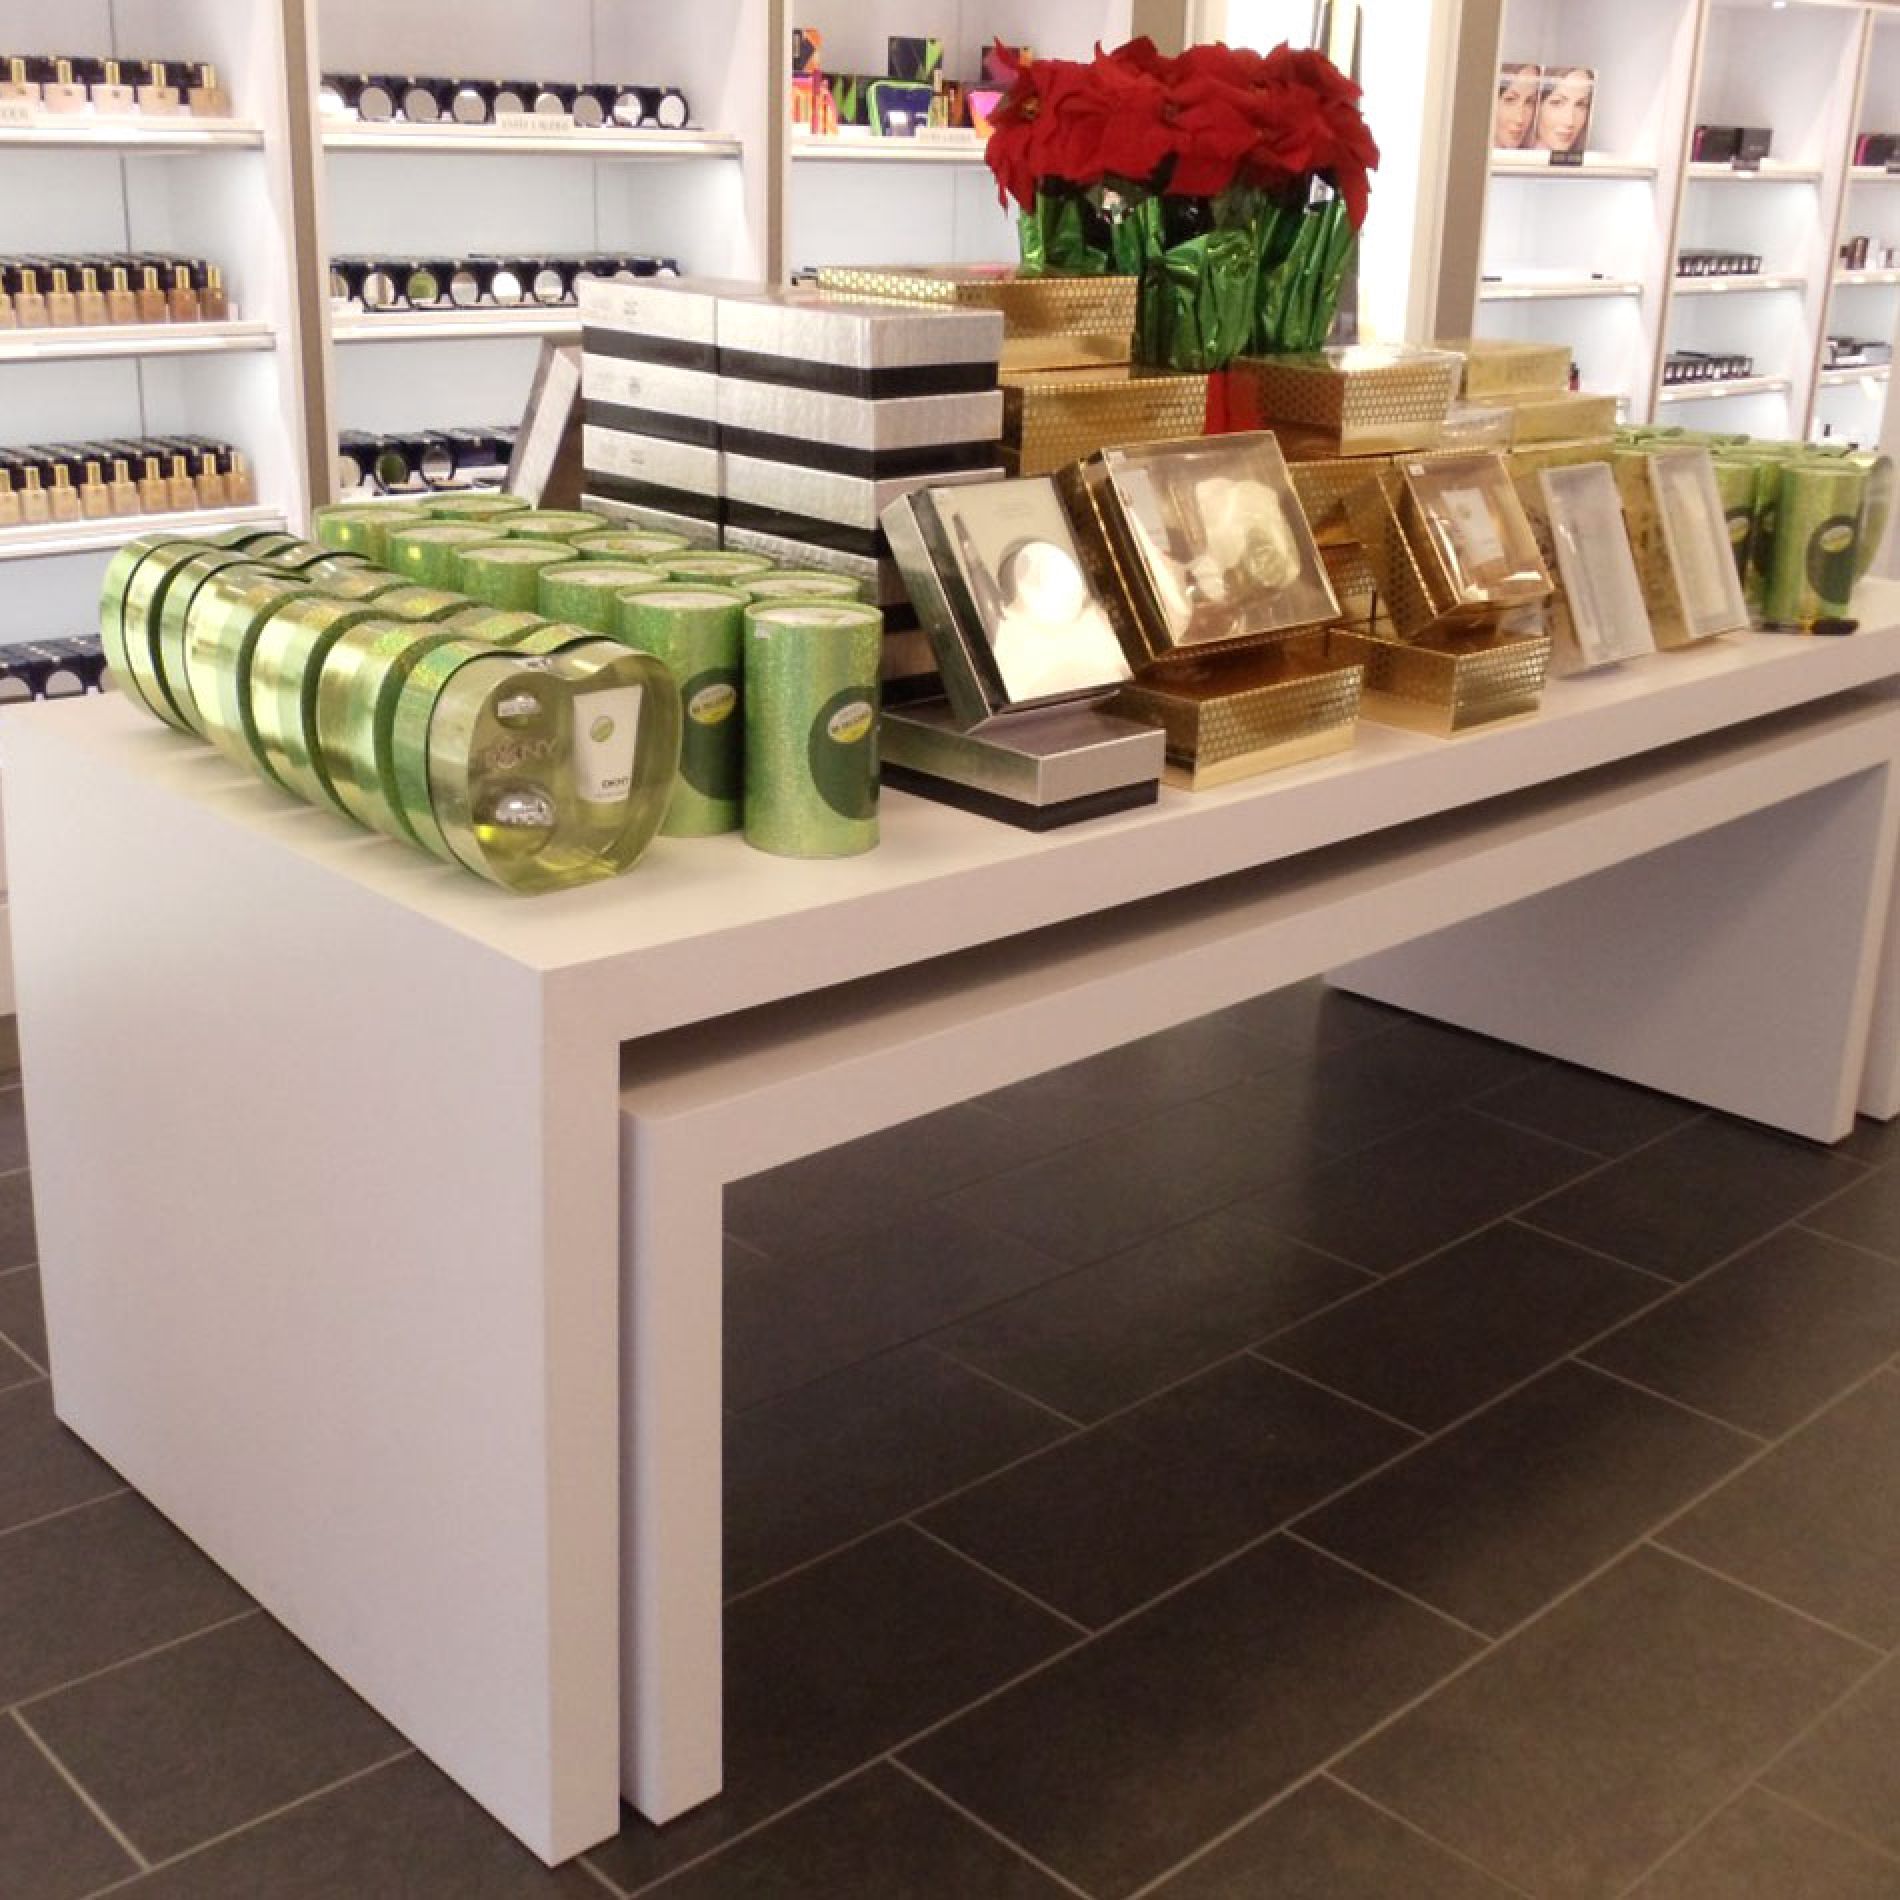 THE COSMETIC STORE DISPLAYS